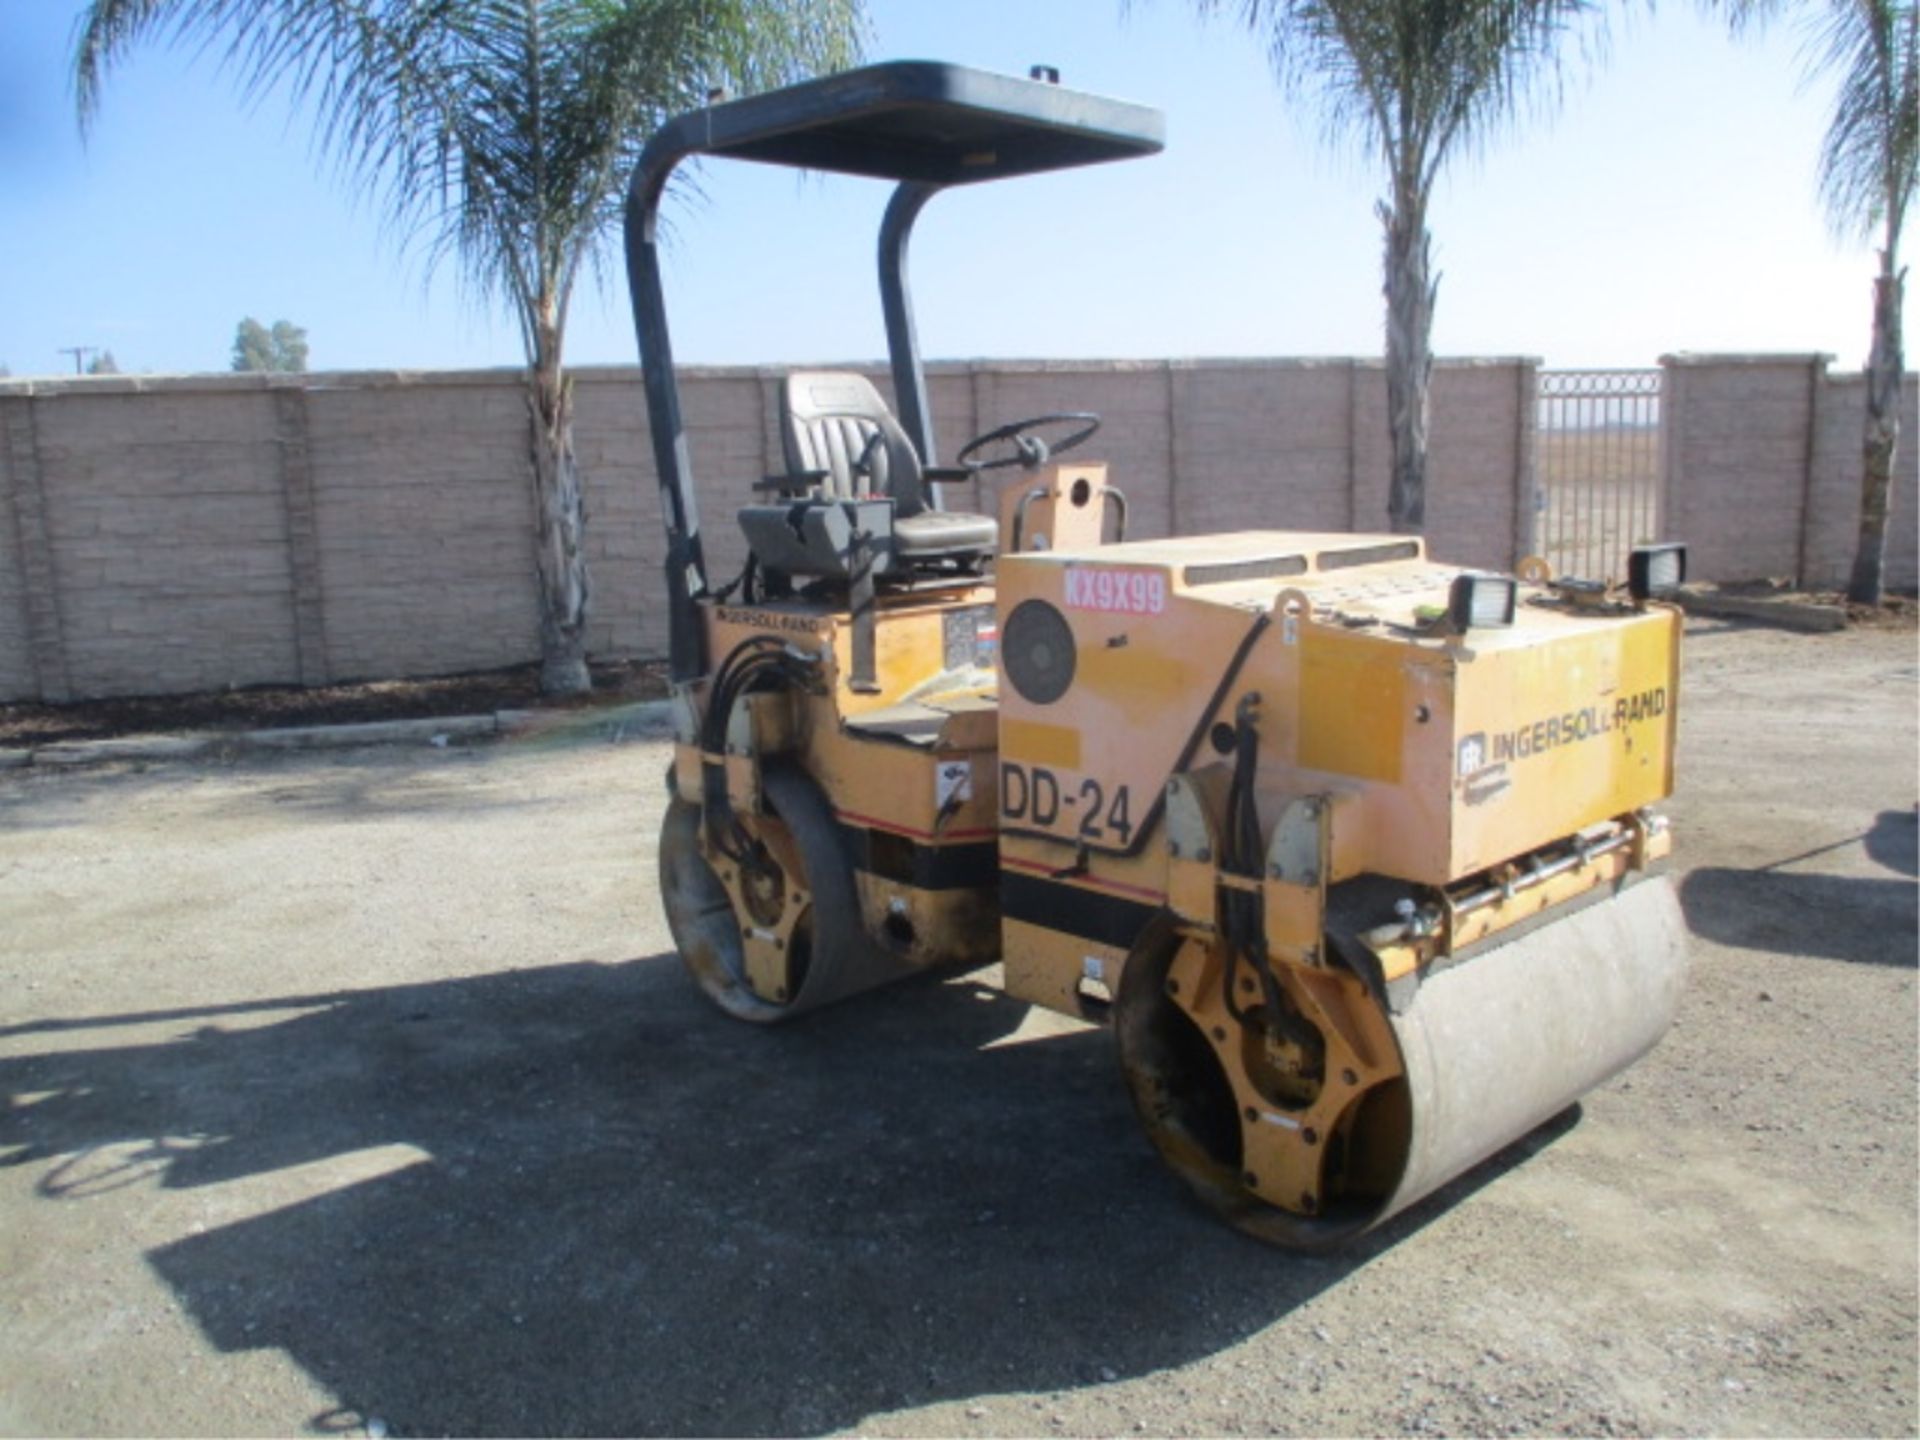 Ingersoll-Rand DD-24 Vibratory Roller, Hatz Diesel, 48" Drums, Water System, Canopy, S/N: 146681, - Image 8 of 45